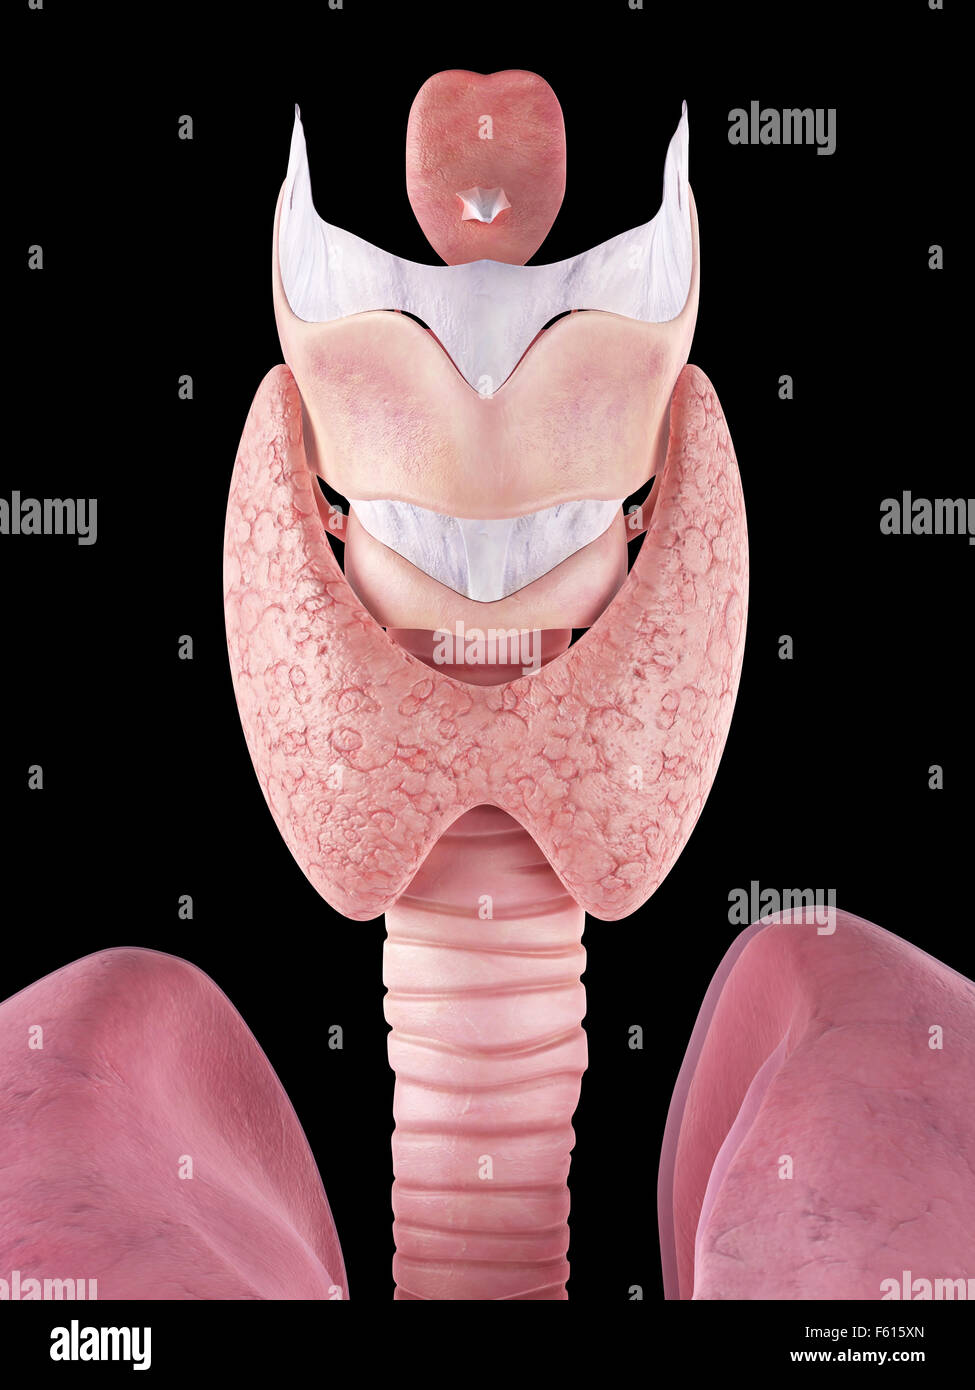 medically accurate illustration of the thyroid gland Stock Photo